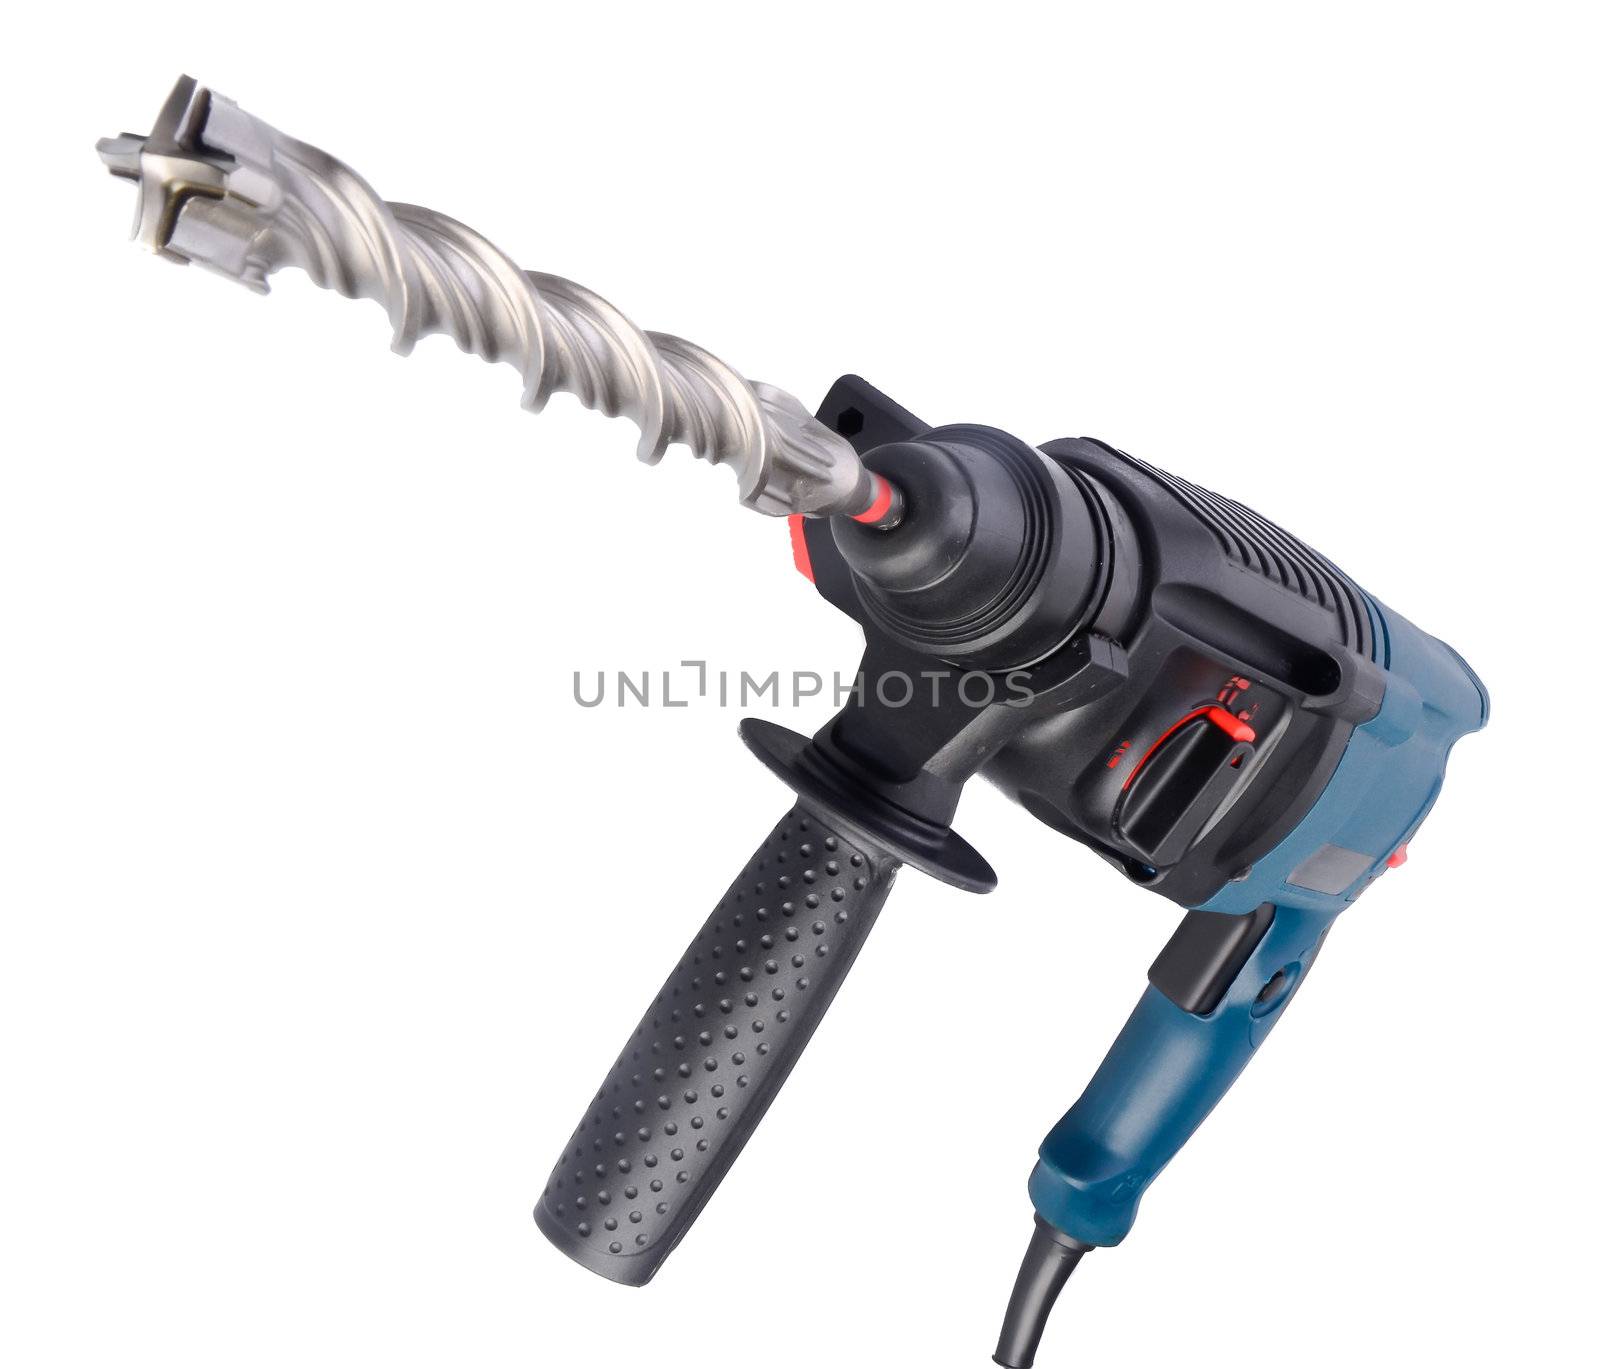 Electric drilling machine on a white background